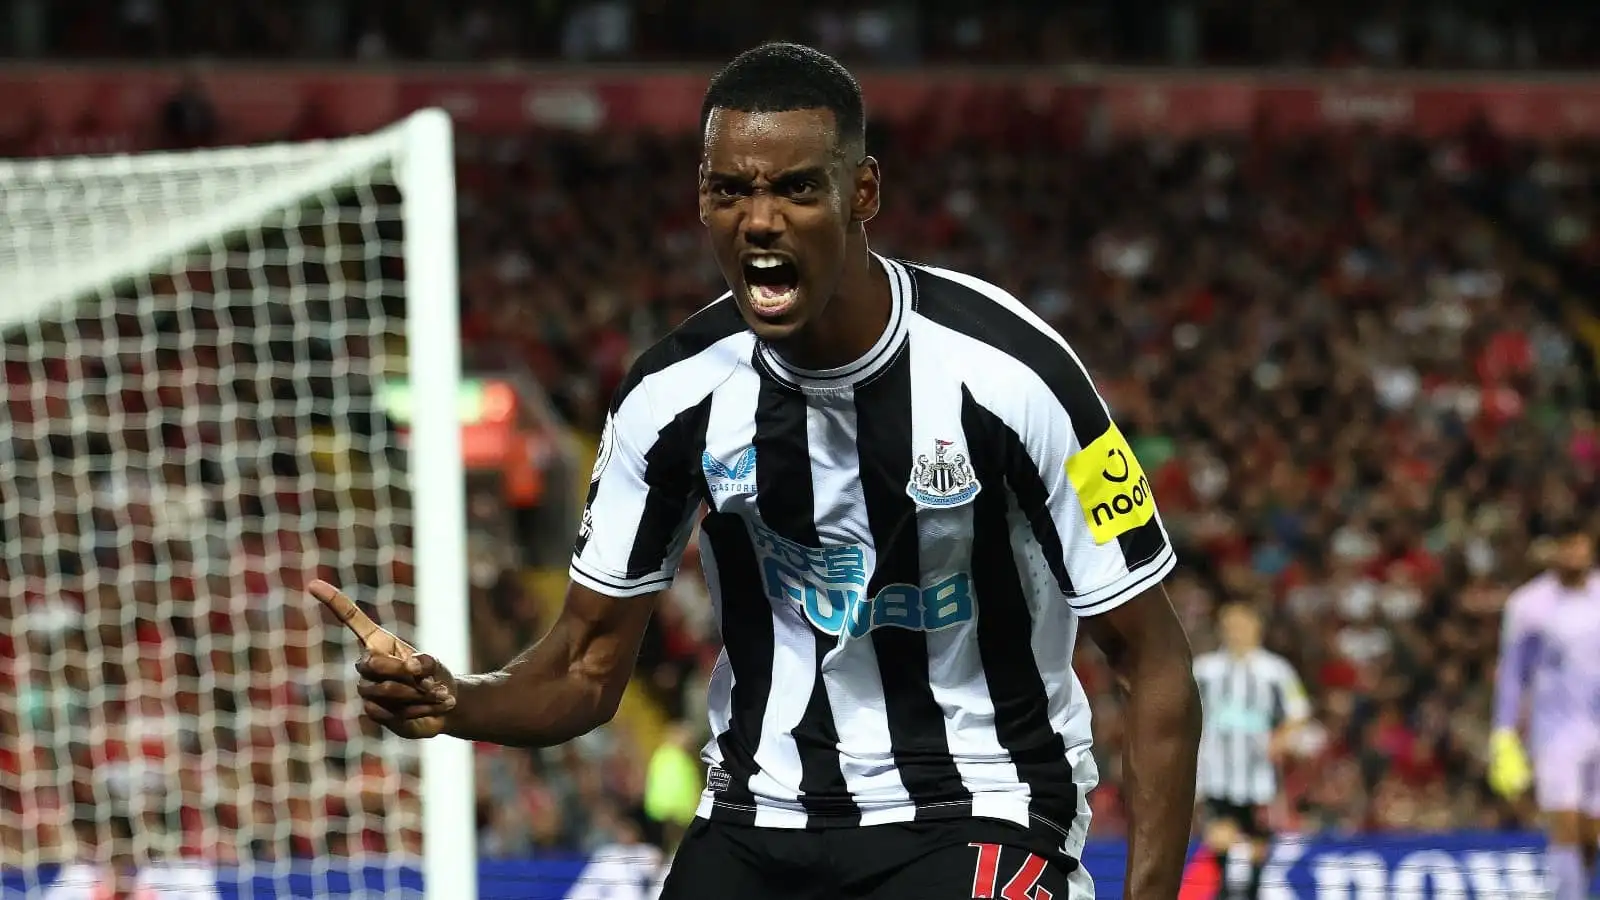 Alexander Isak tipped to emulate Newcastle United hero after ‘fantastic’ debut against Liverpool